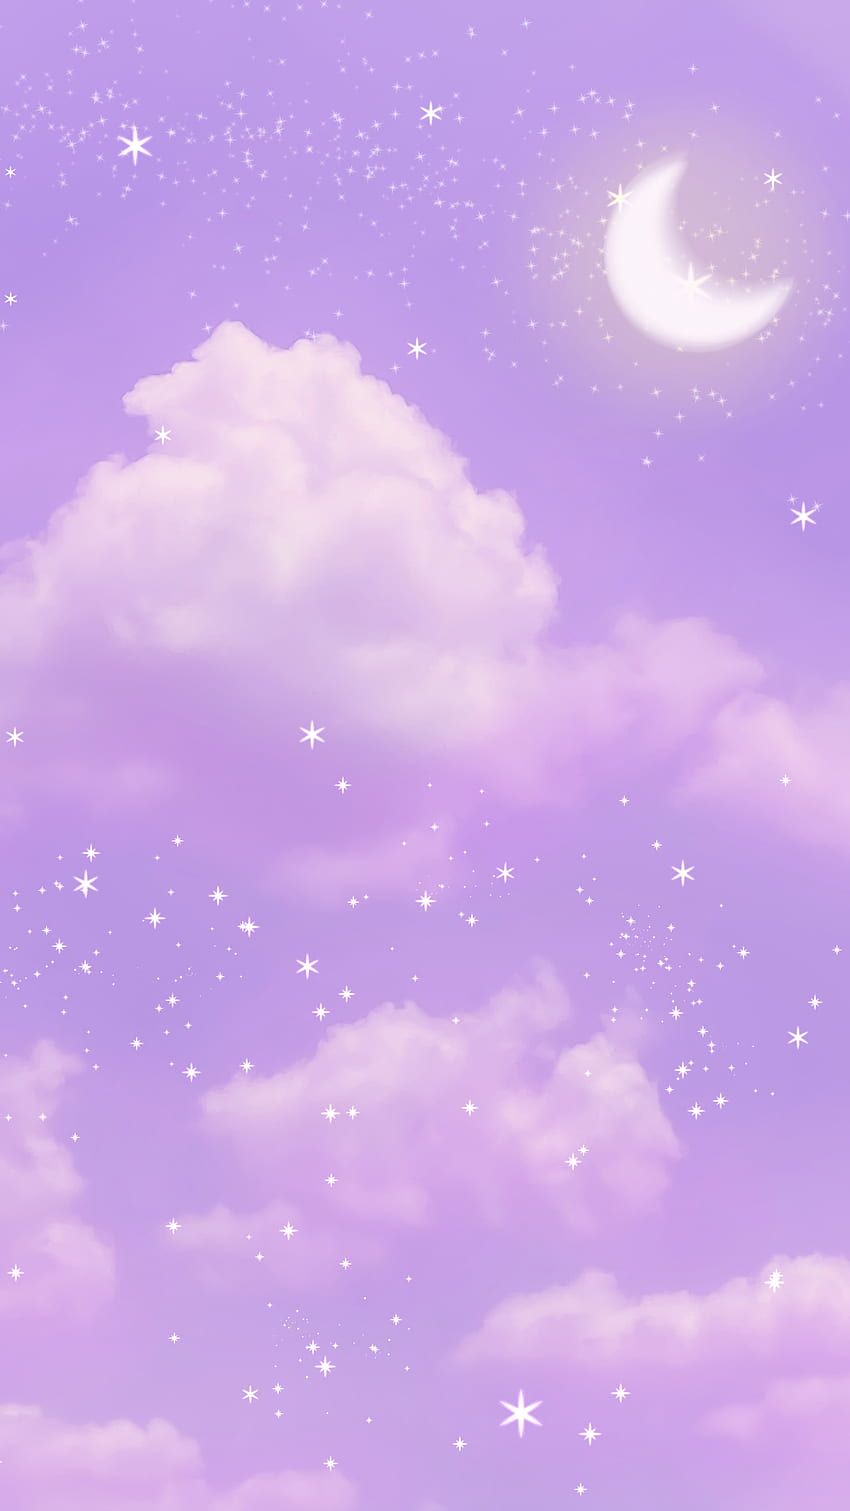 Aesthetic phone background of a purple sky with white clouds, stars, and a white crescent moon - Purple